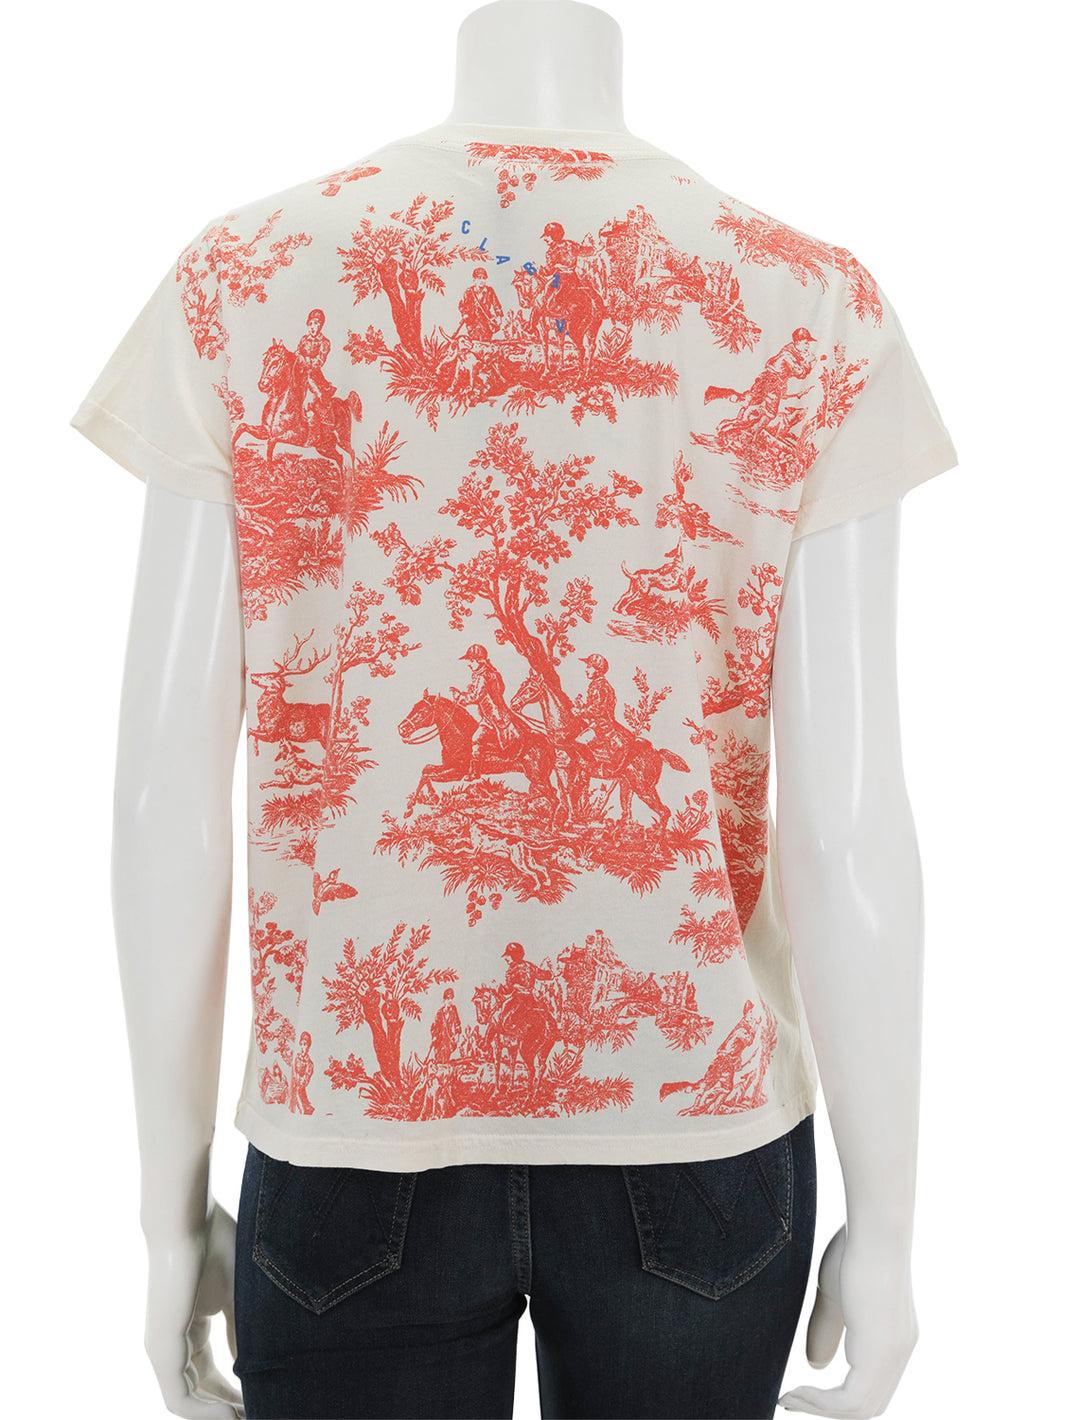 Back view of Clare V.'s classic tee in st. calais toile.